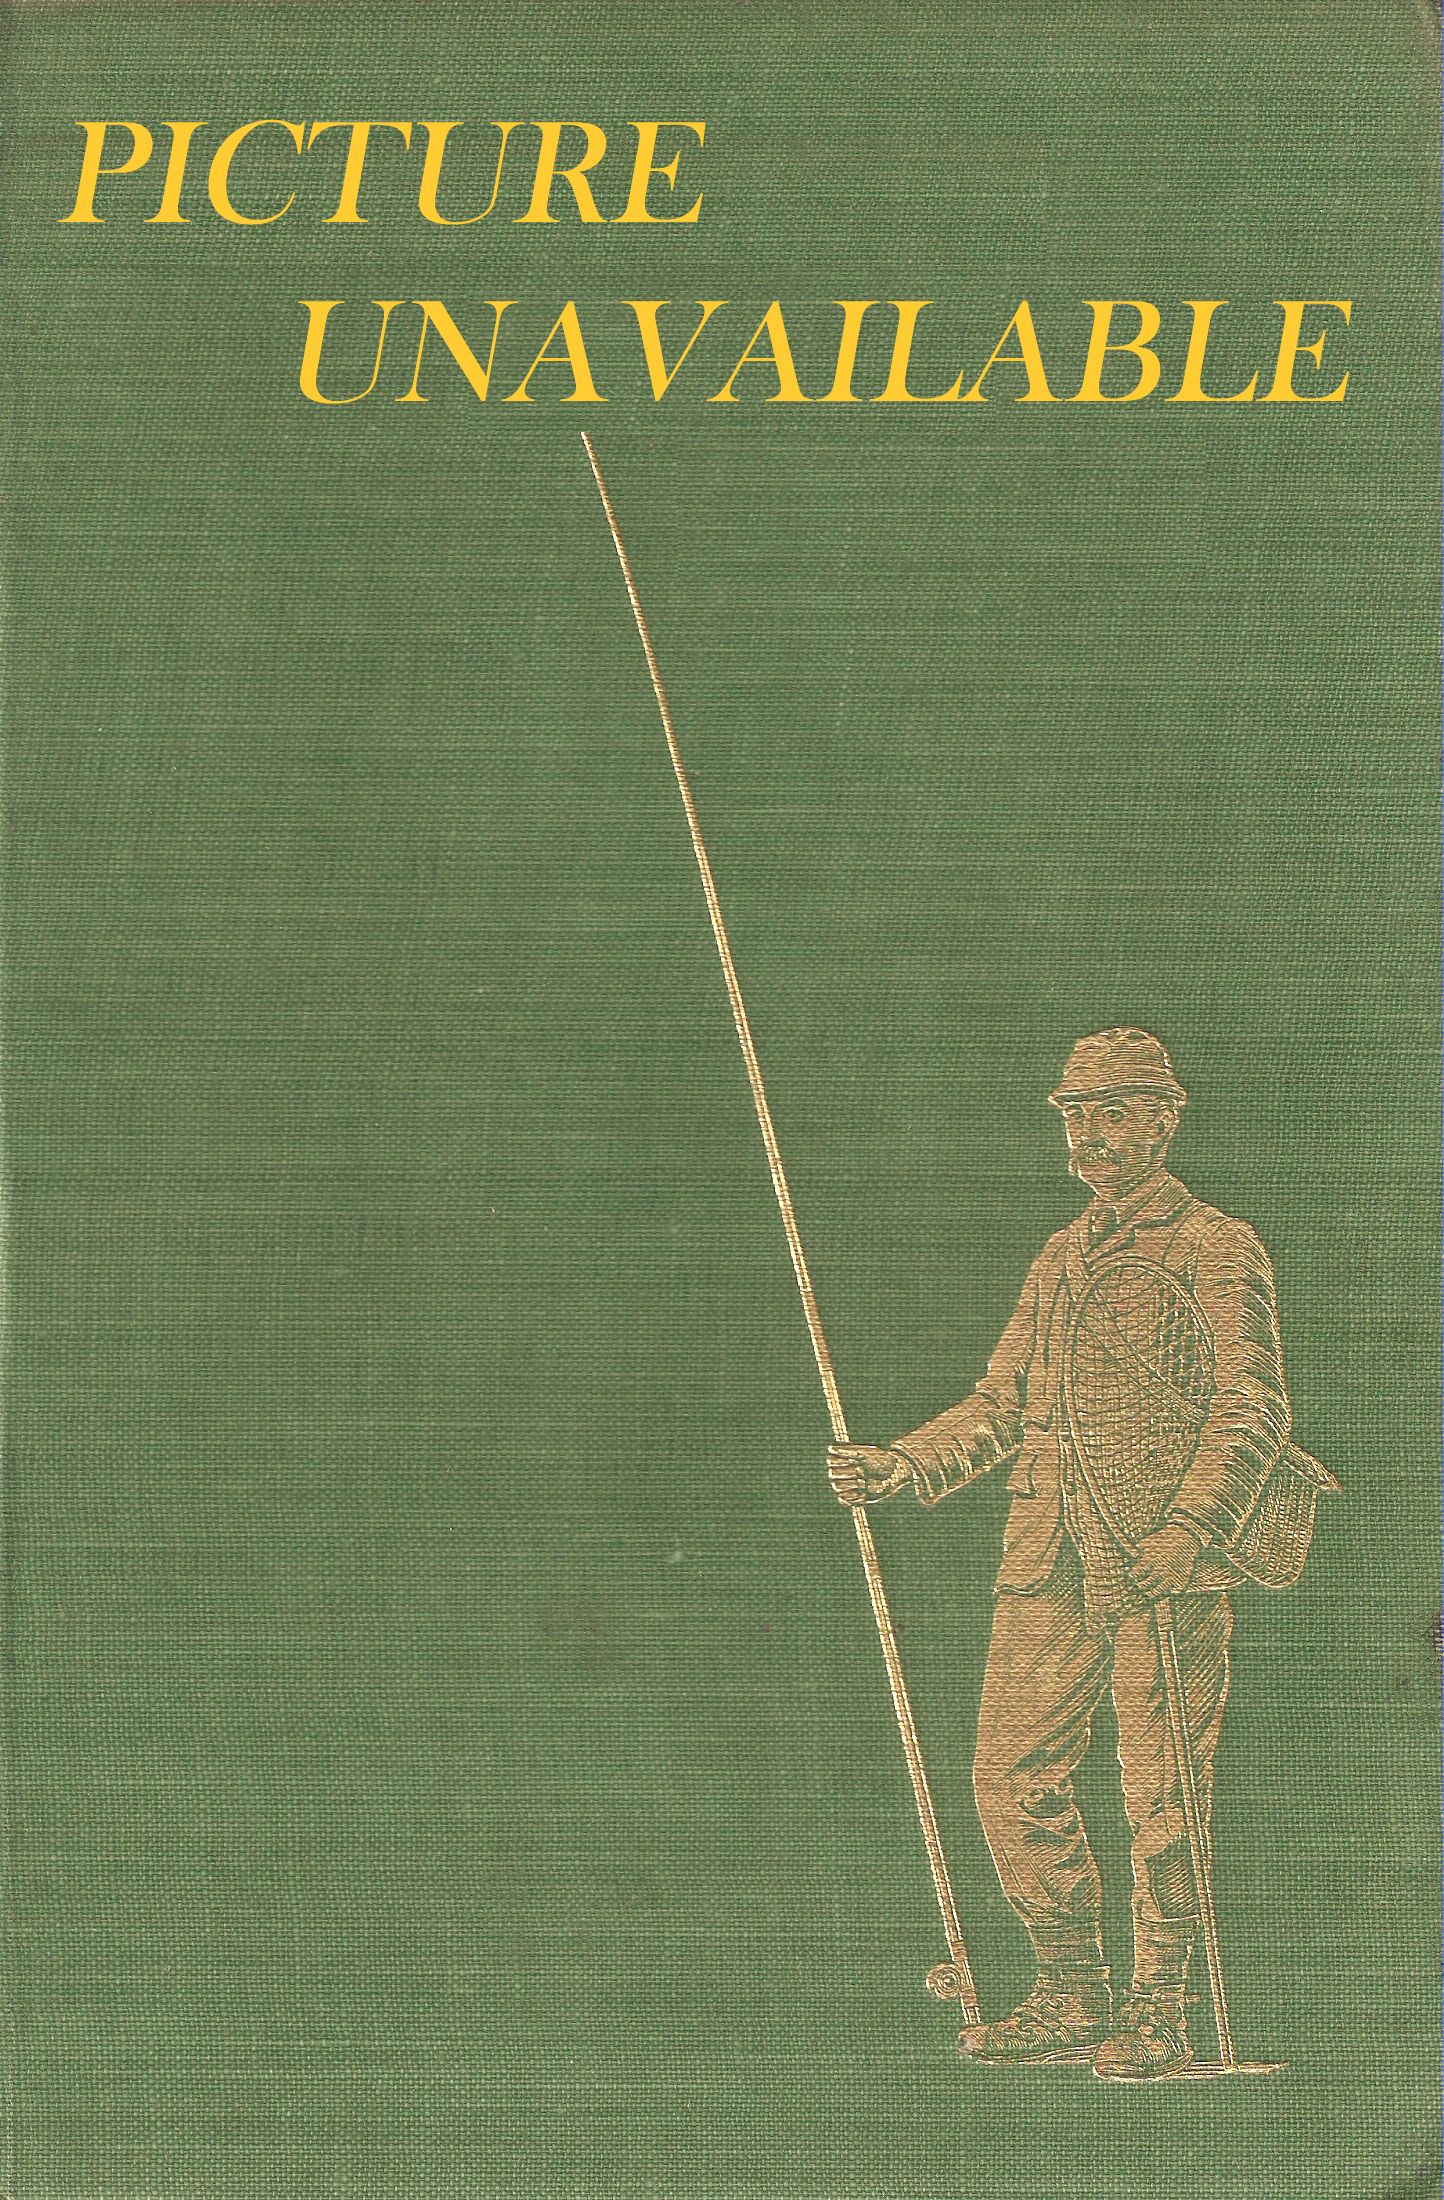 A GAMEFISHER'S YEAR. By William B. Currie.